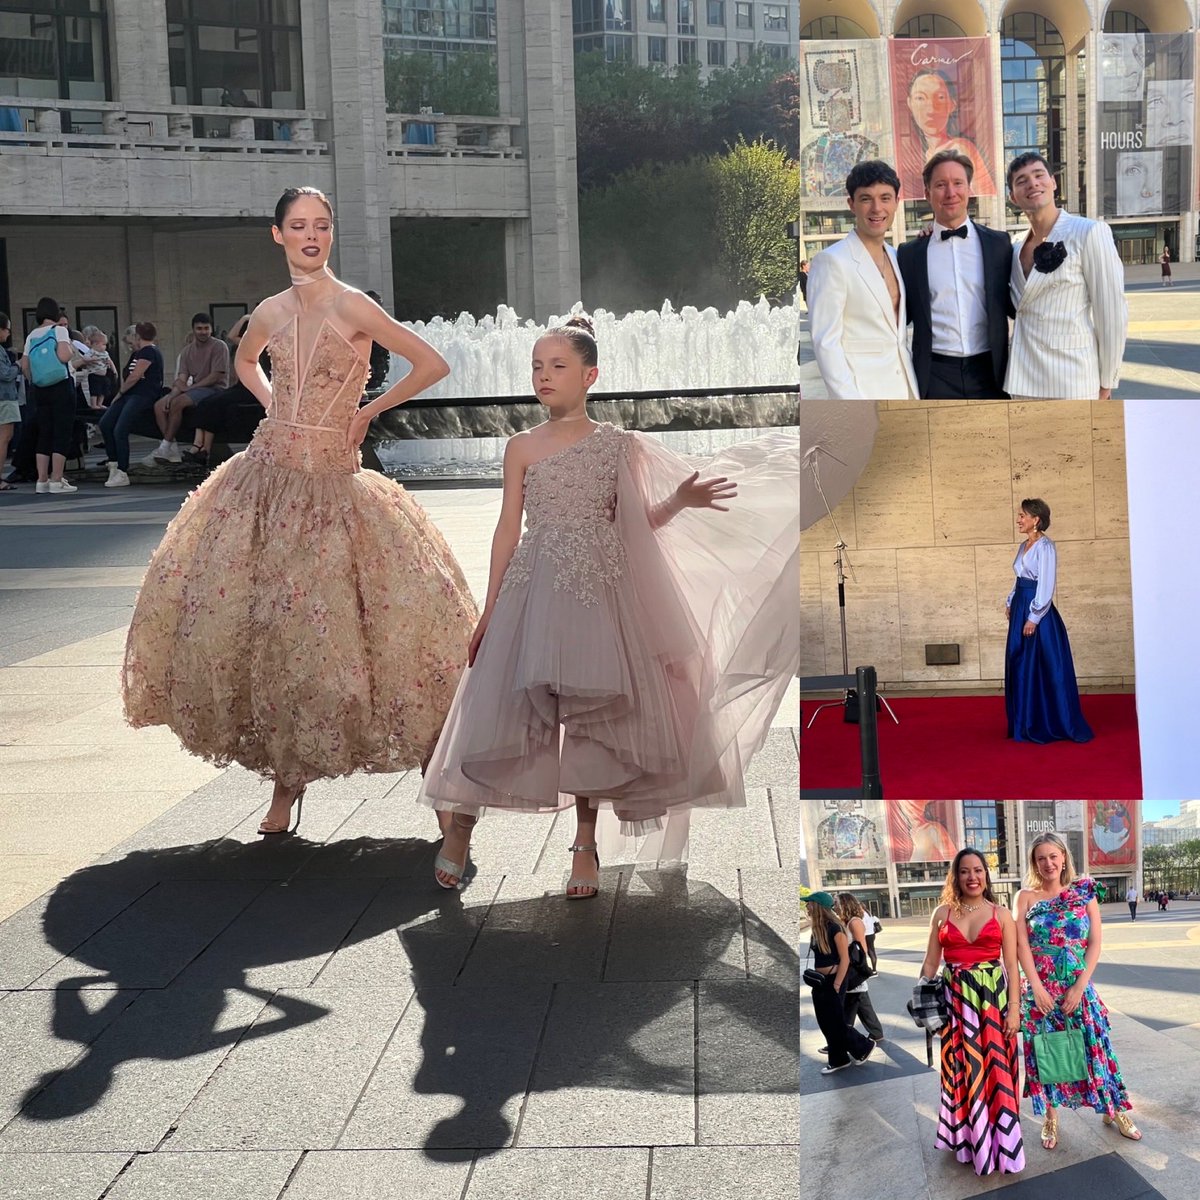 Thursday’s Spring Gala ⁦@nycballet⁩ ⁦@LincolnCenter⁩ #LincolnCenter #NYC